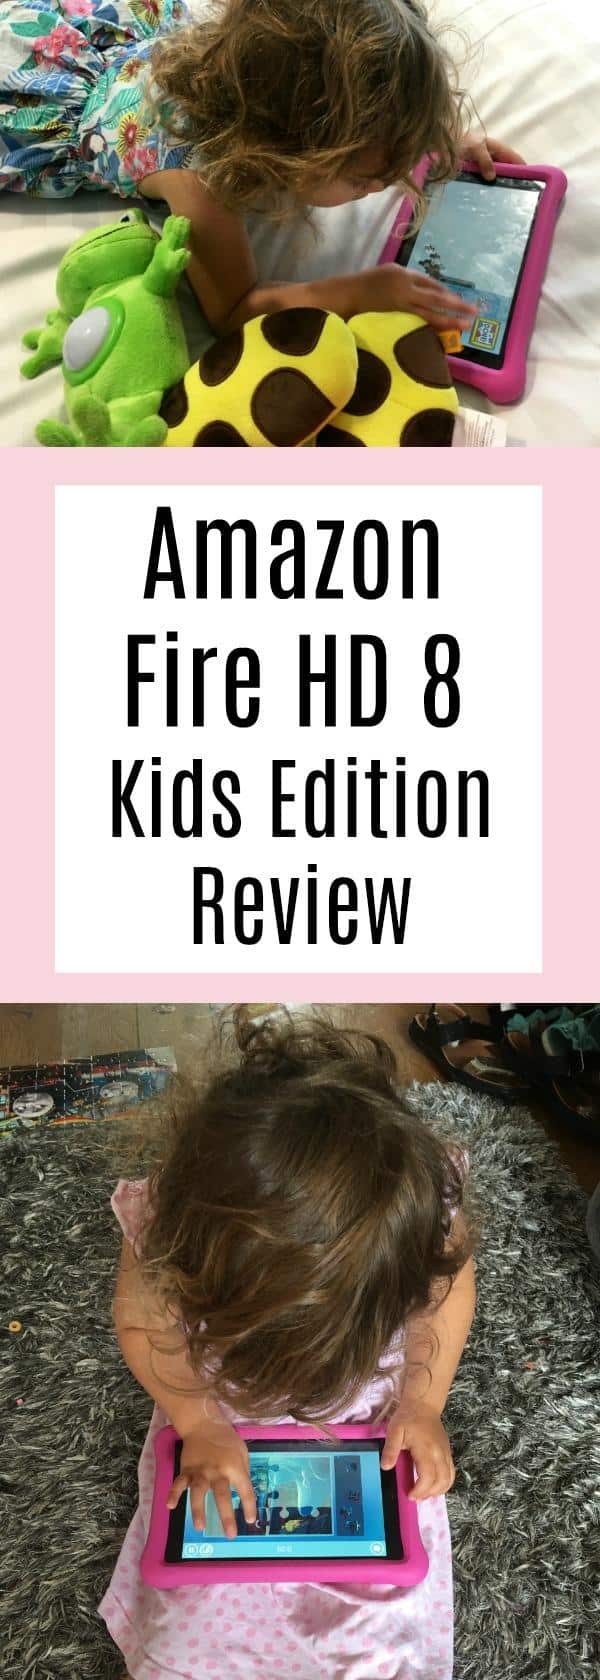 Amazon Fire Kids edition step by step guide. This review looks at the Amazon Fire HD 8 Kids Edition including tips for setting up the tablet and key features 